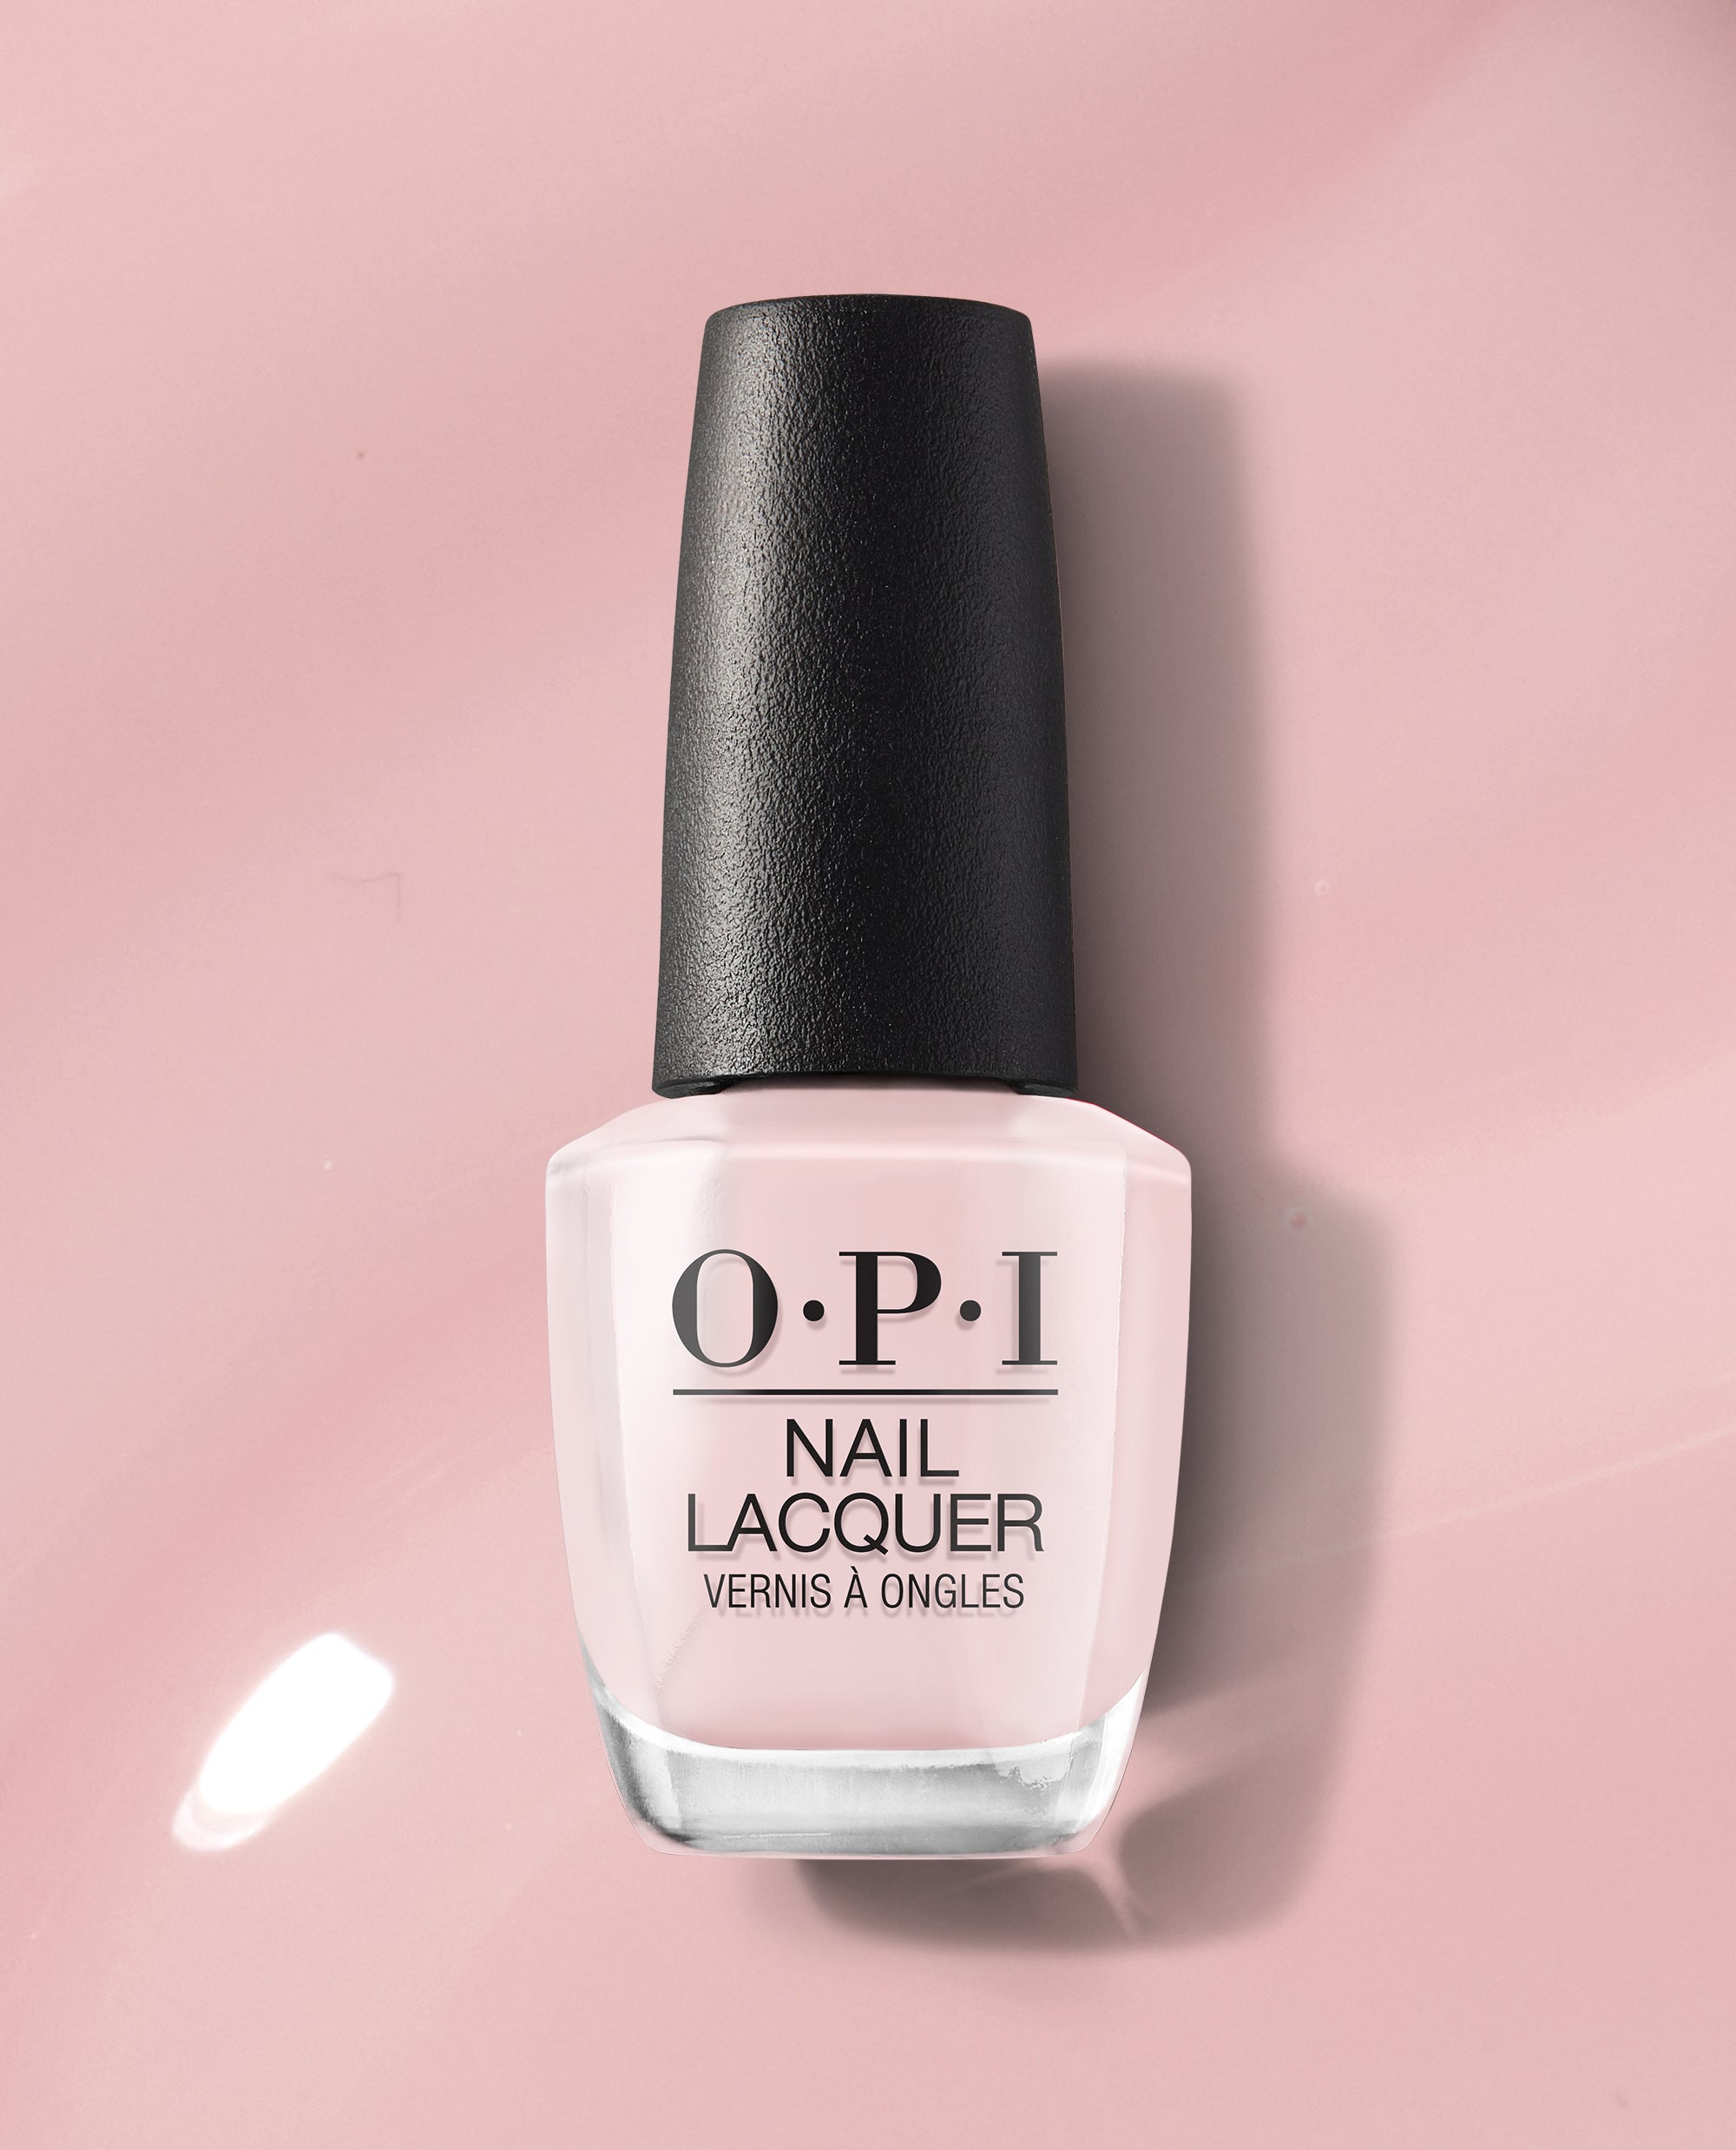 OPI Just Launched Its First Vegan Nail Polish Collection | VegNews